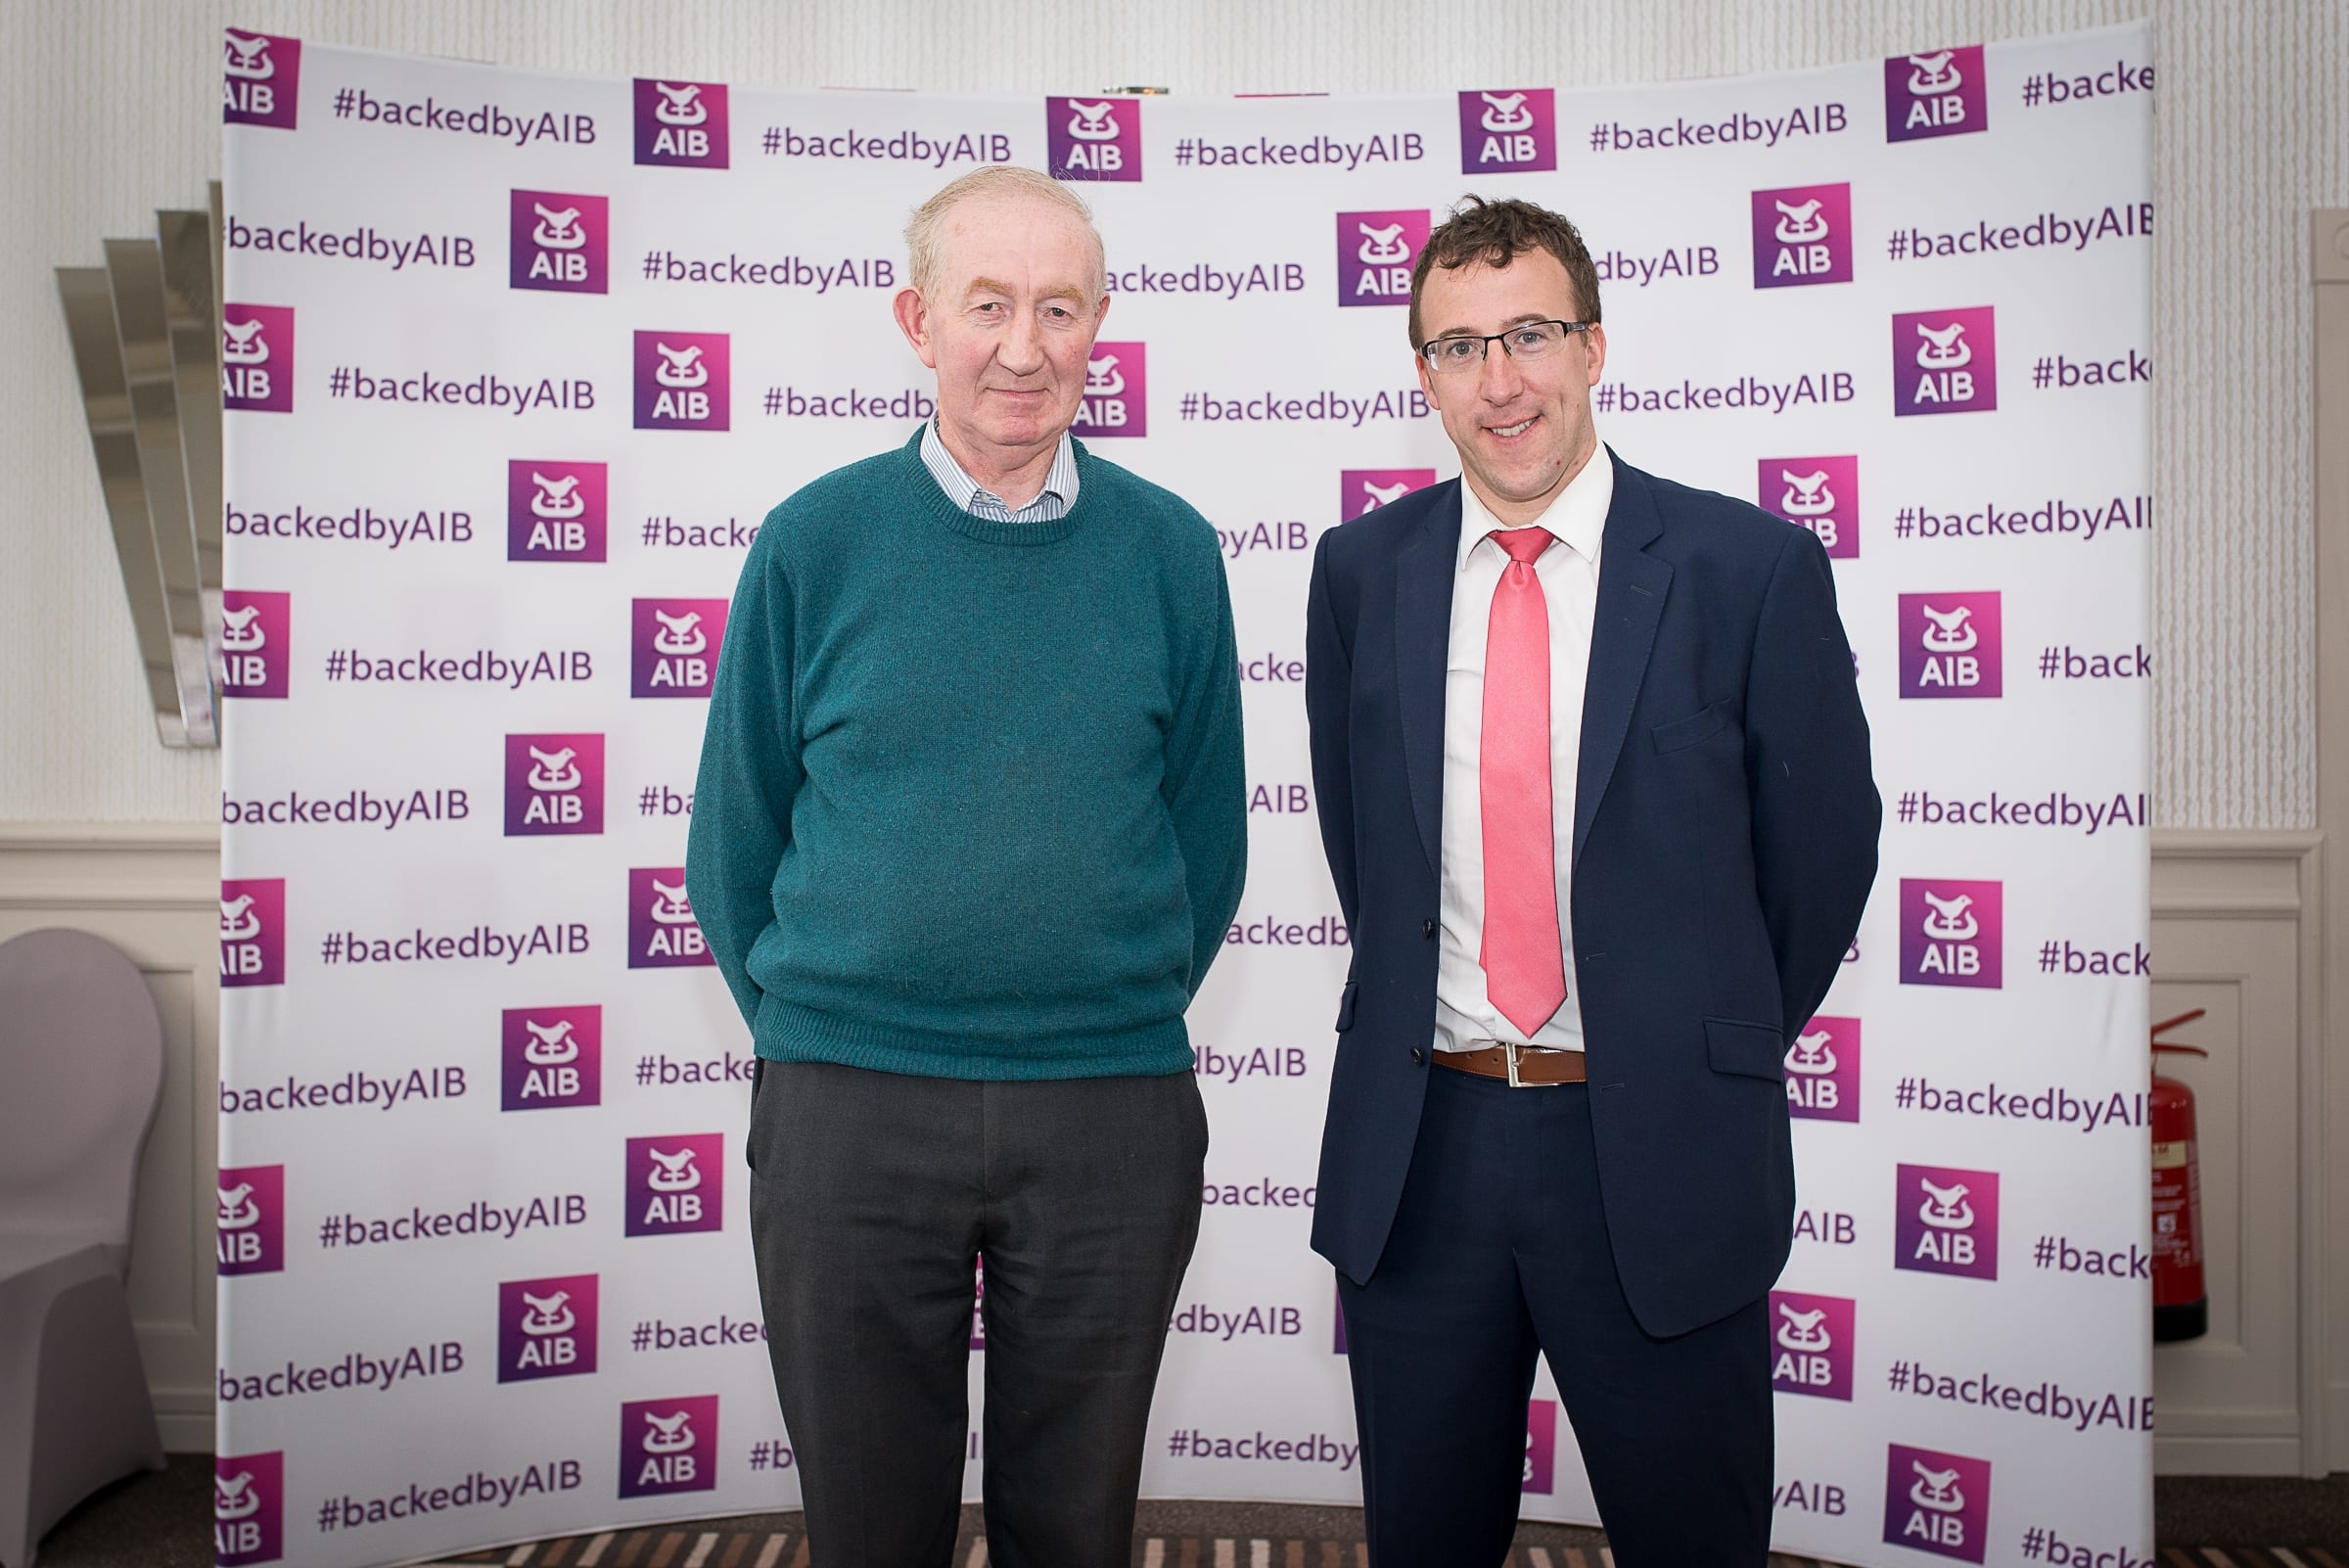 From left to right Agri Tourism Event Newcastlewest which took place on the 29th April in The Longcourt House Hotel: Dave Dillane, Shane Whelan - AIB,